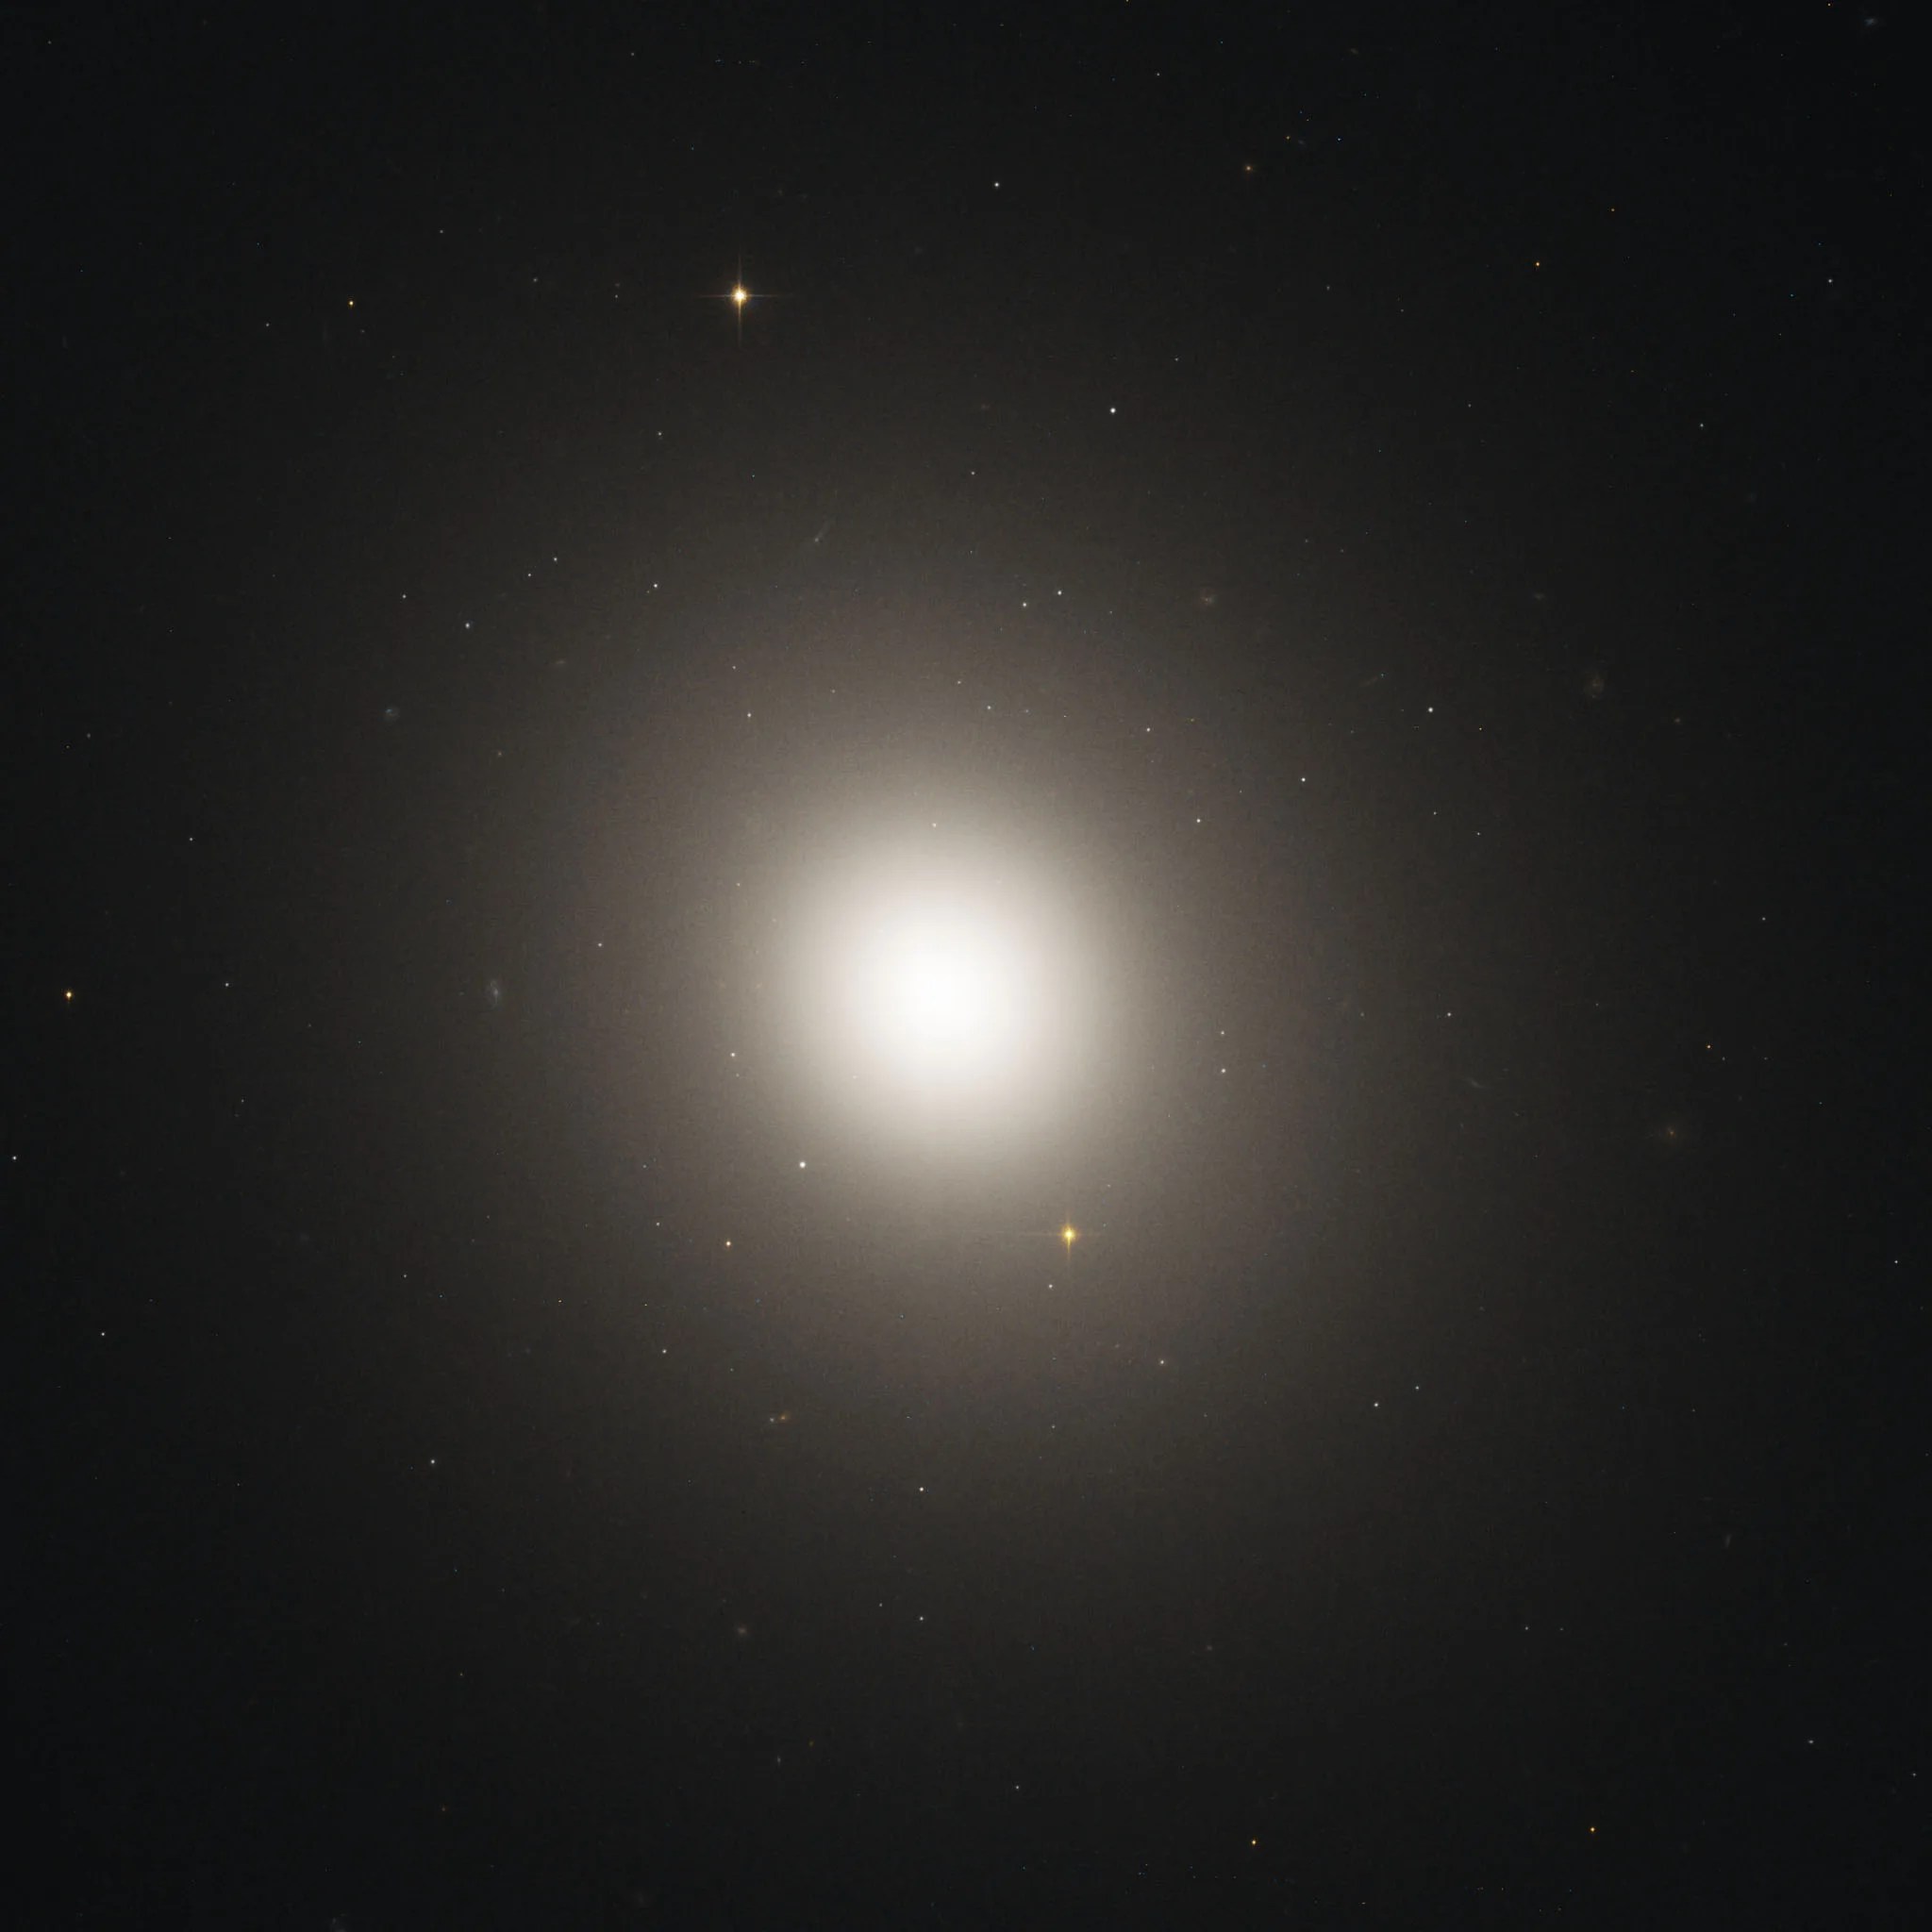 A hazy white-yellow light shines against black space, dotted with faint, distant stars.